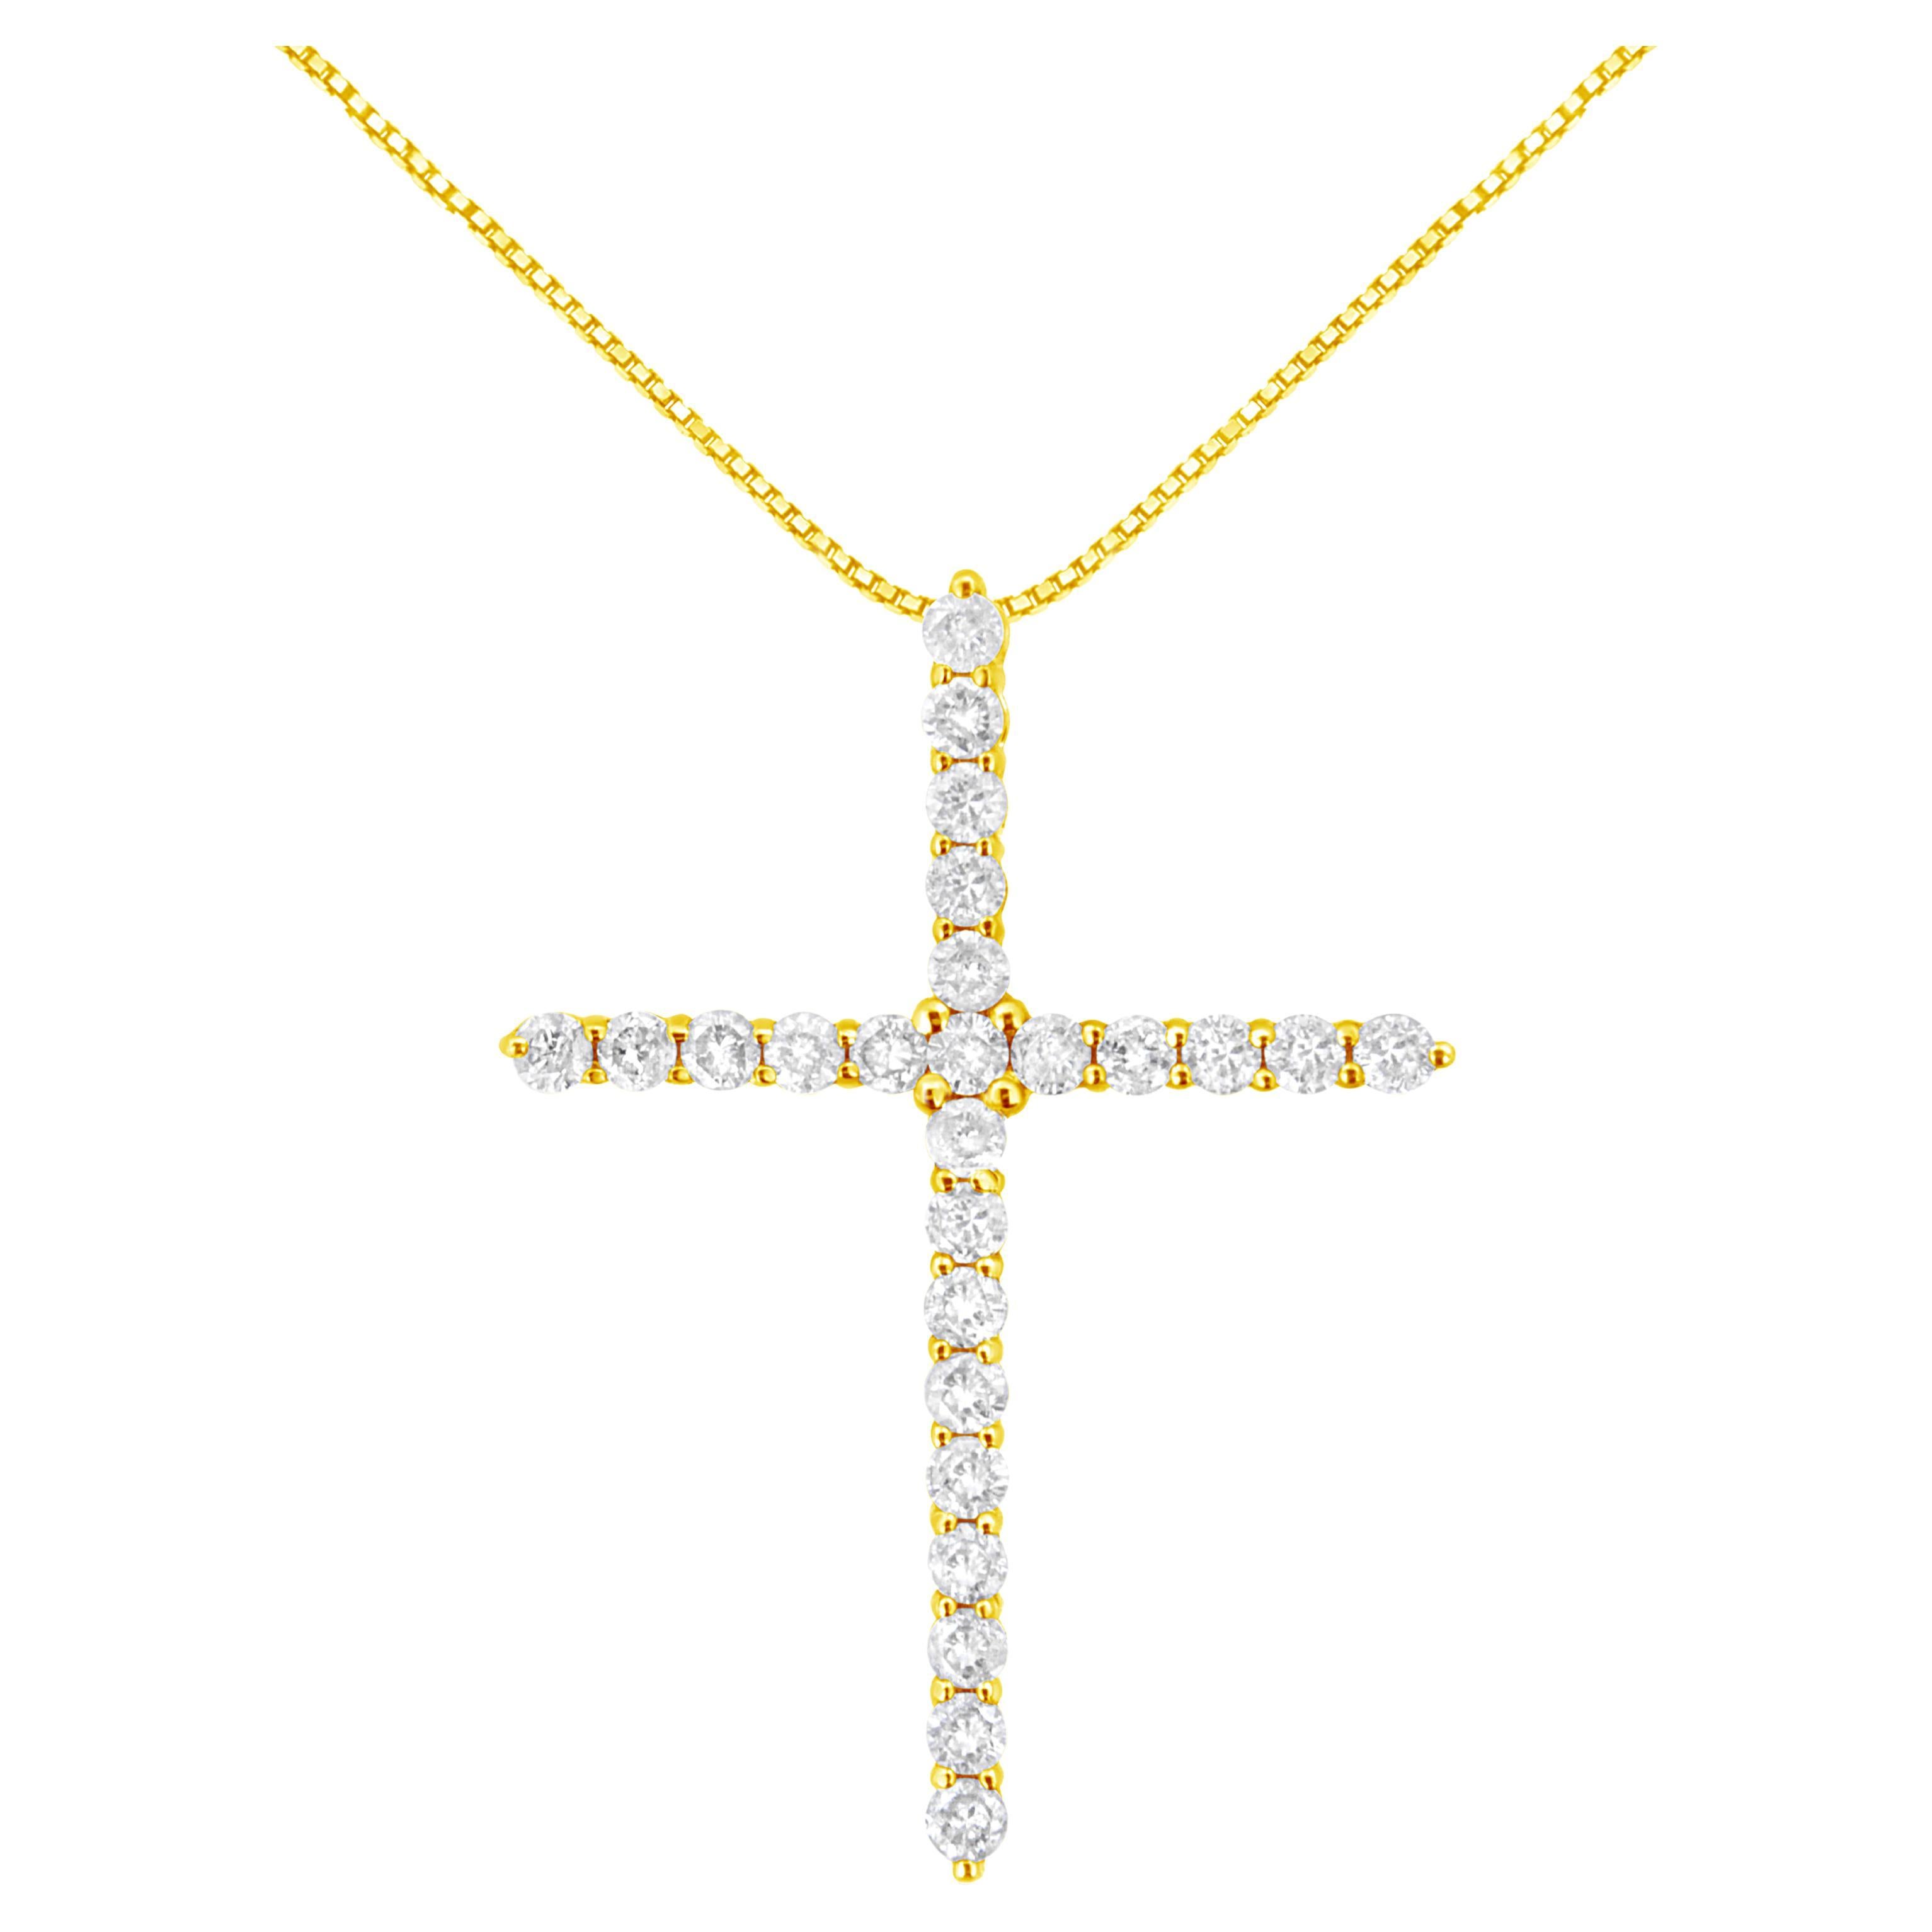 Yellow Gold Plated Sterling Silver 2.0 Carat Diamond Cross Pendant Necklace